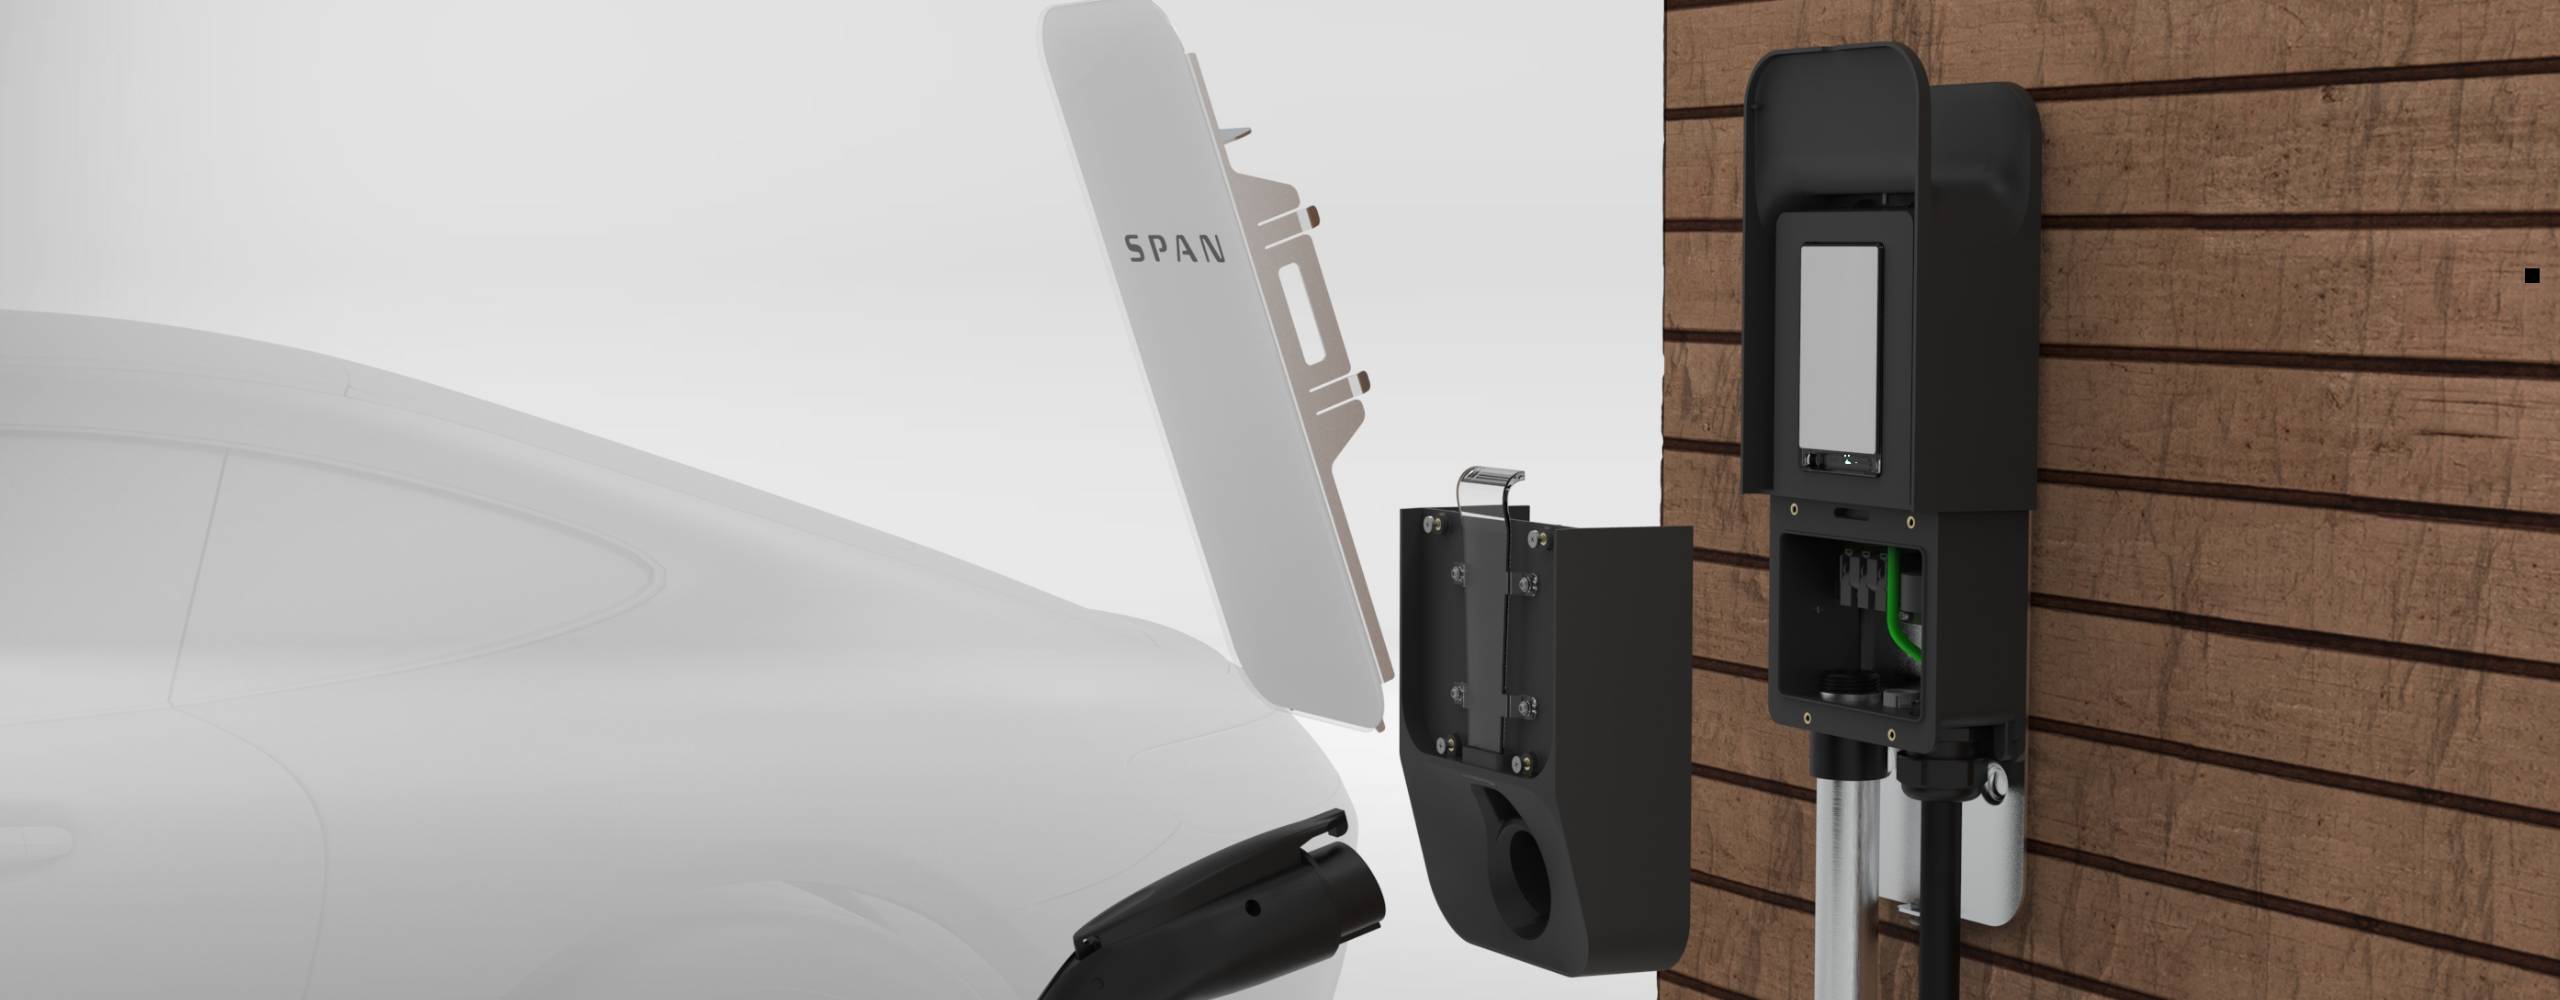 A rendering of the Span Drive outside with the bottom and front panel away from the wall mount showing off internal hardware.